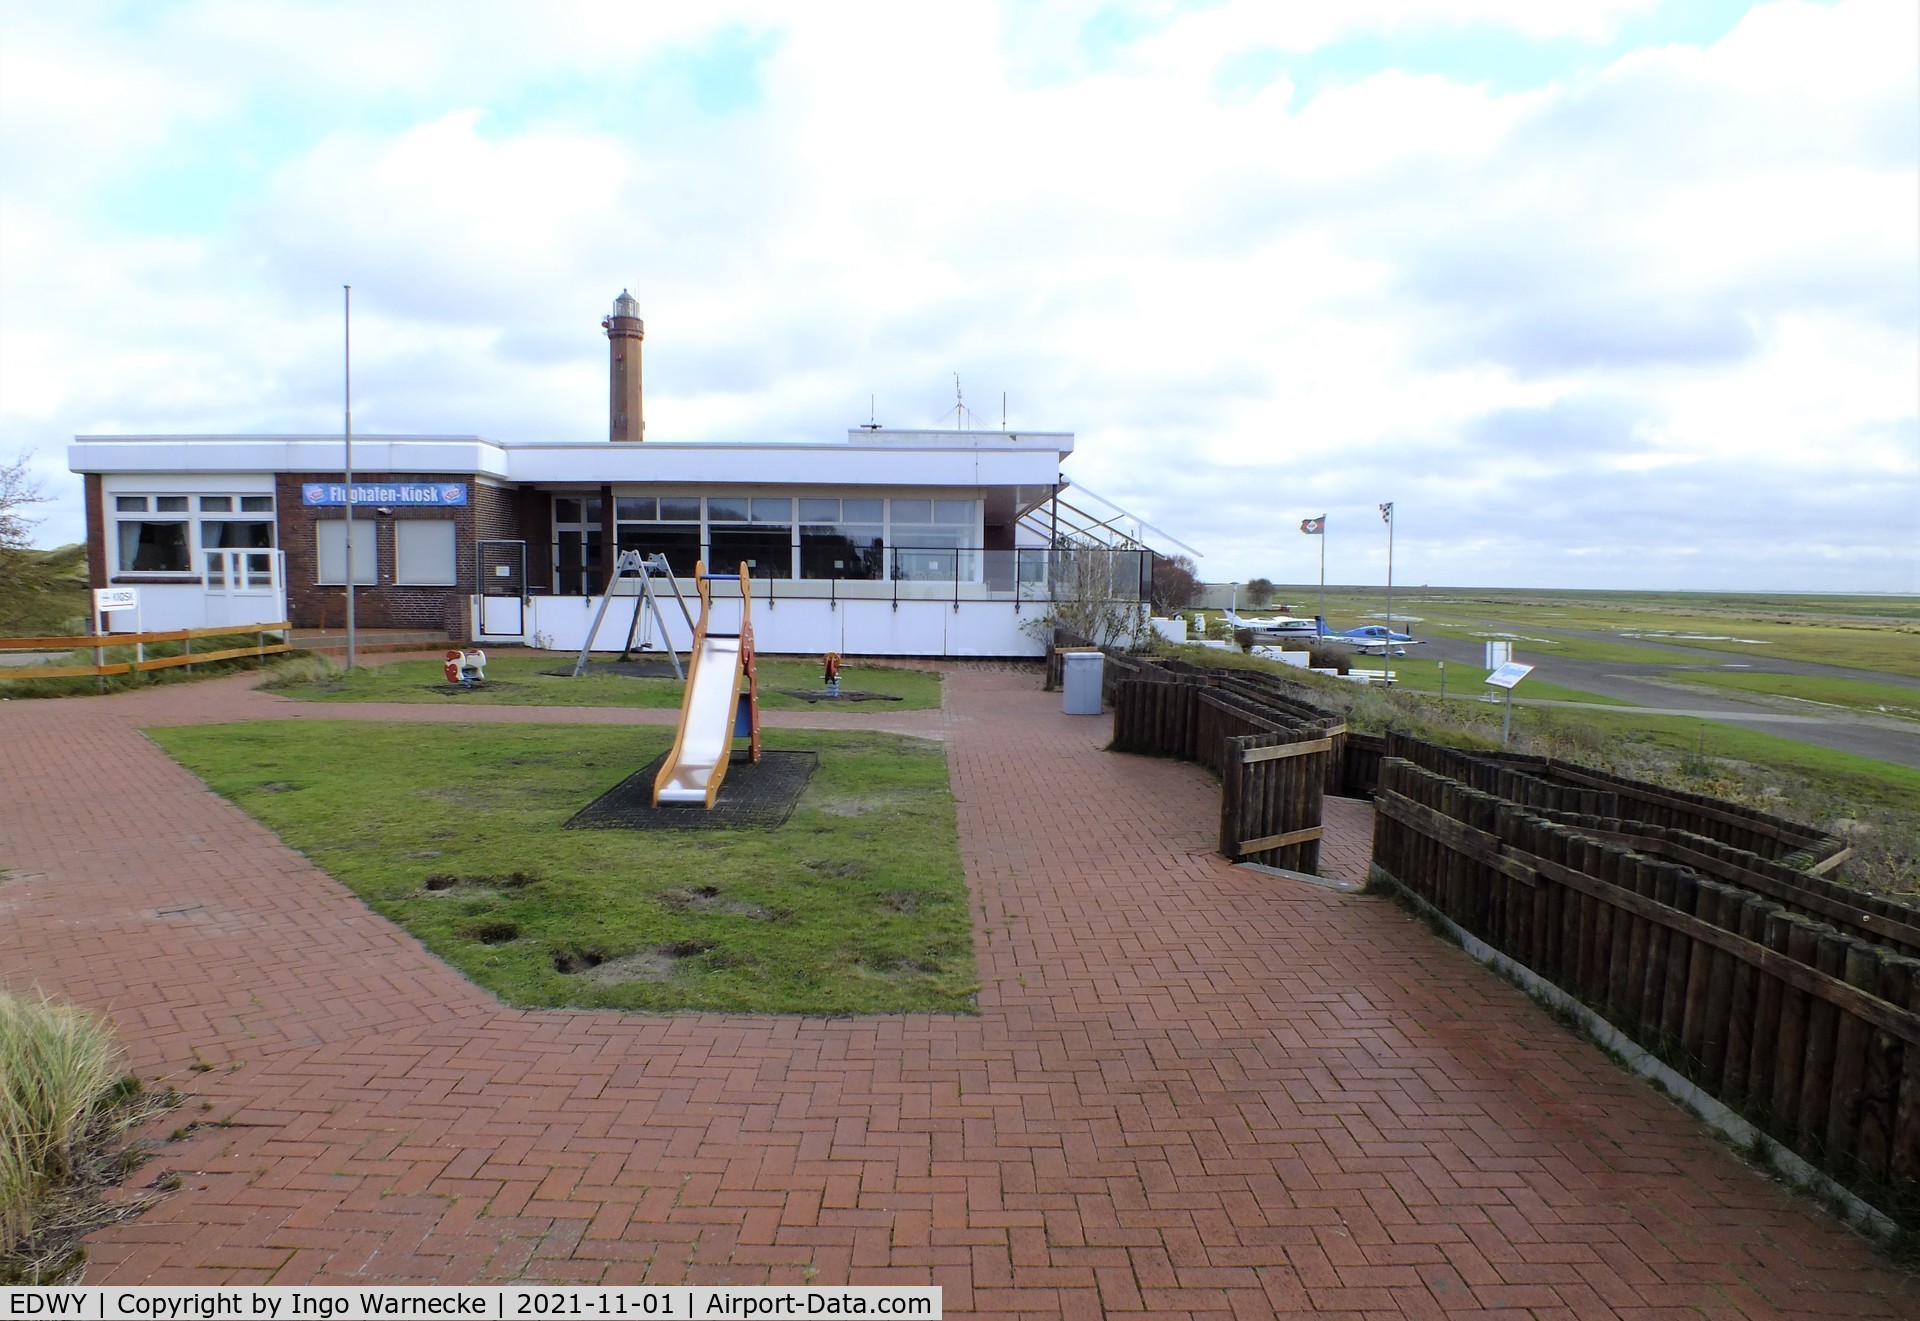 Norderney Airport, Norderney Germany (EDWY) - terminal, restaurant and tower at Norderney airfield